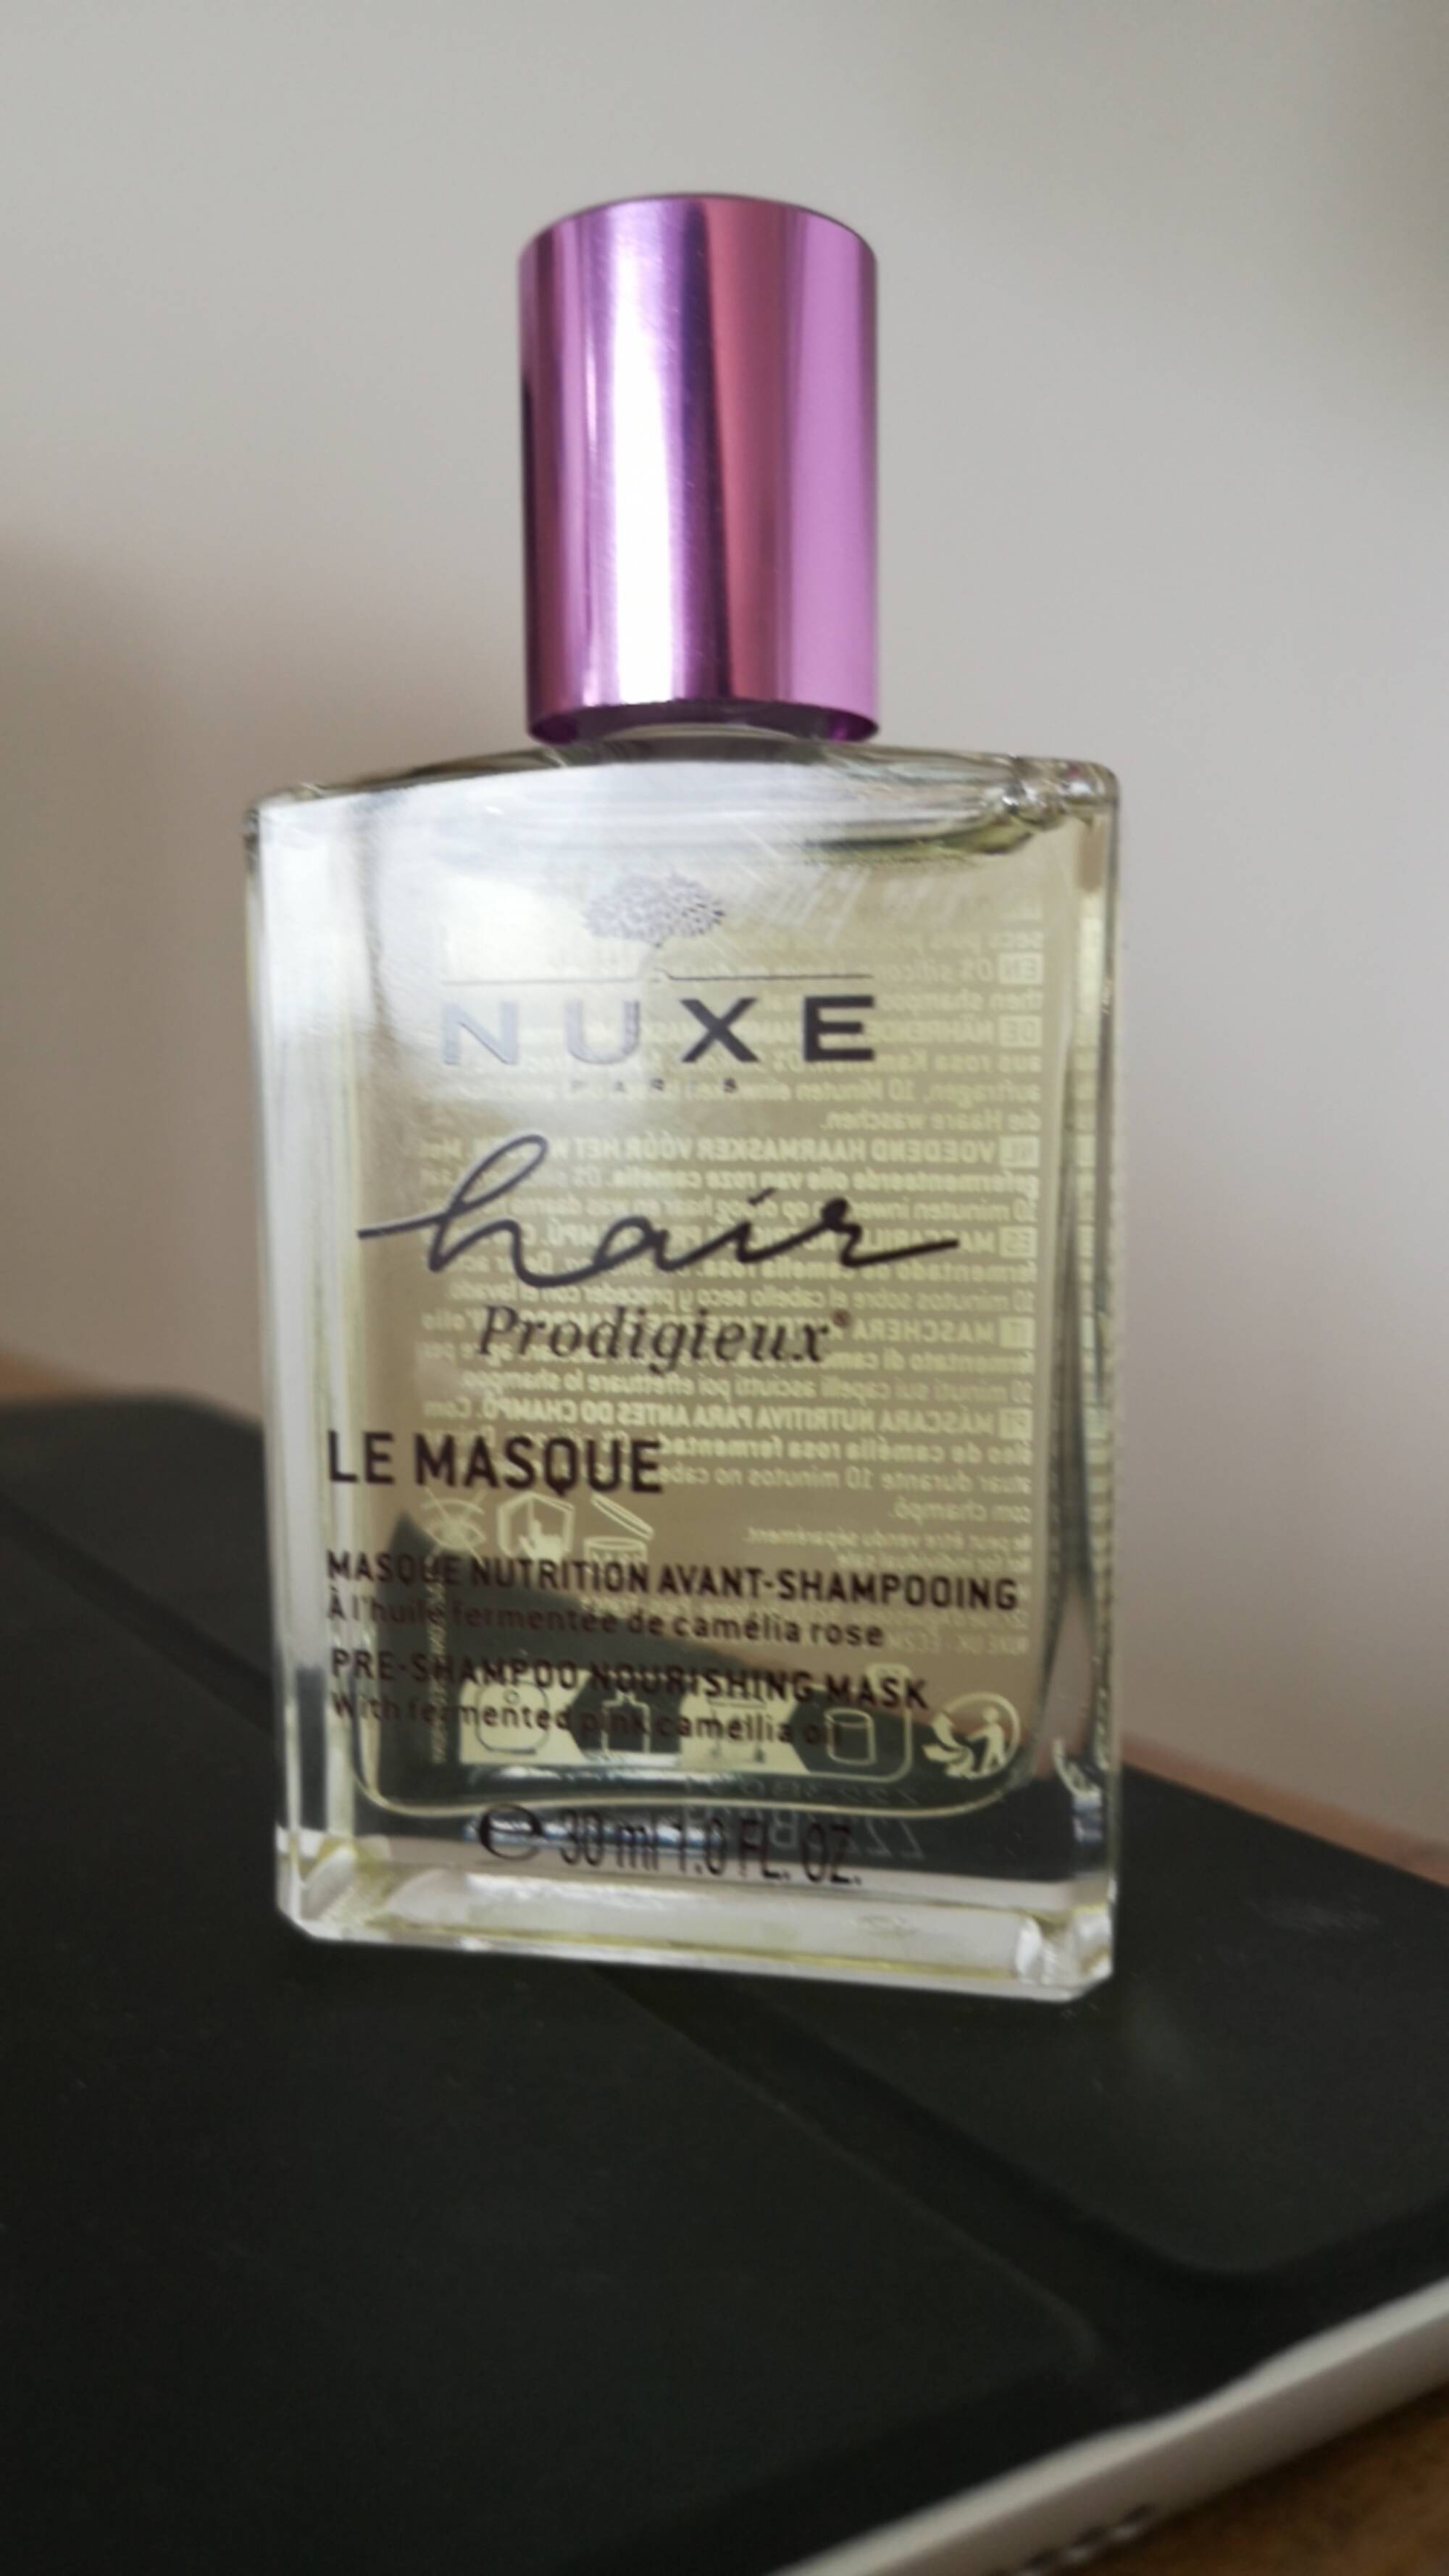 NUXE - Hair prodigieux - Masque nutrition avant-shampooing